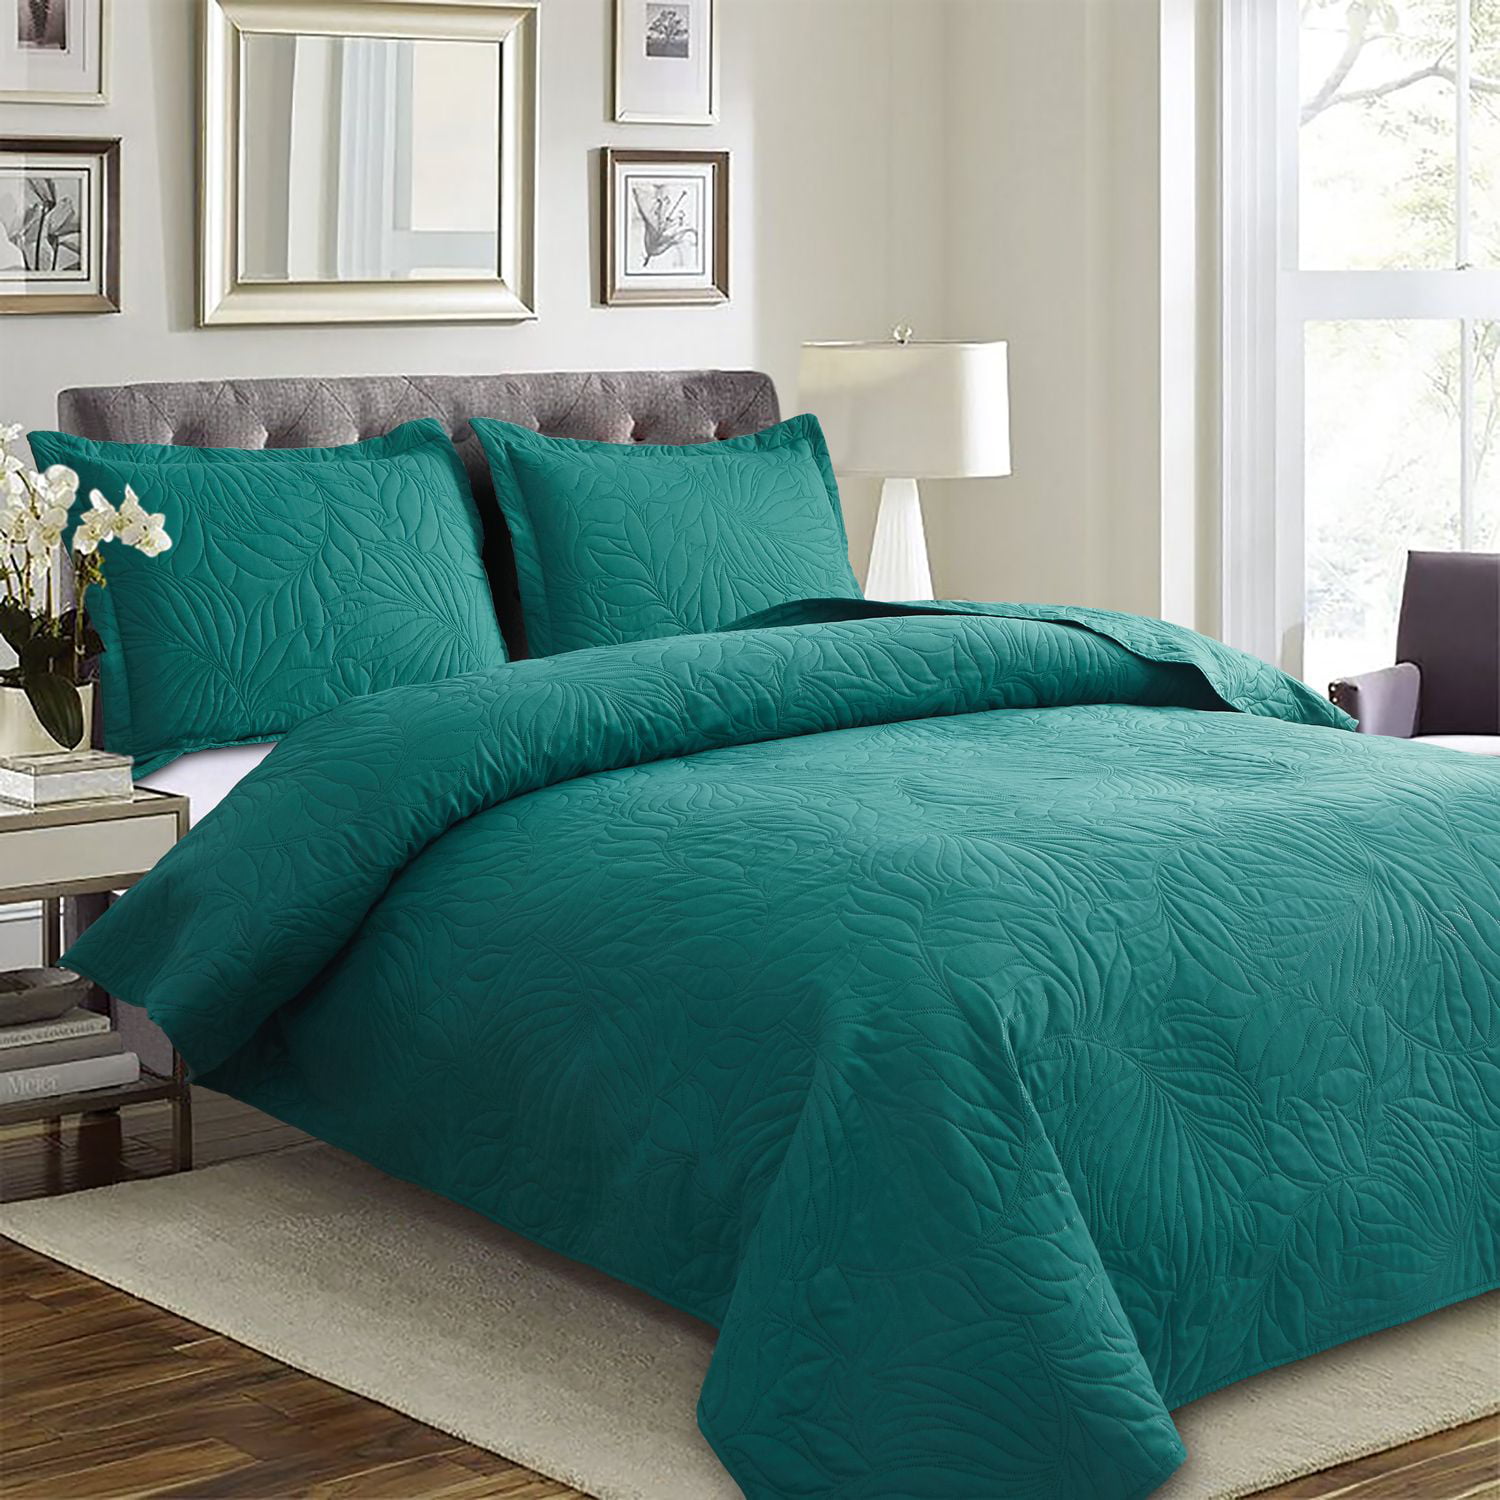 3 Piece Quilted Embossed Bedspread With Pillowcases Breathable Bedding Bed Set 